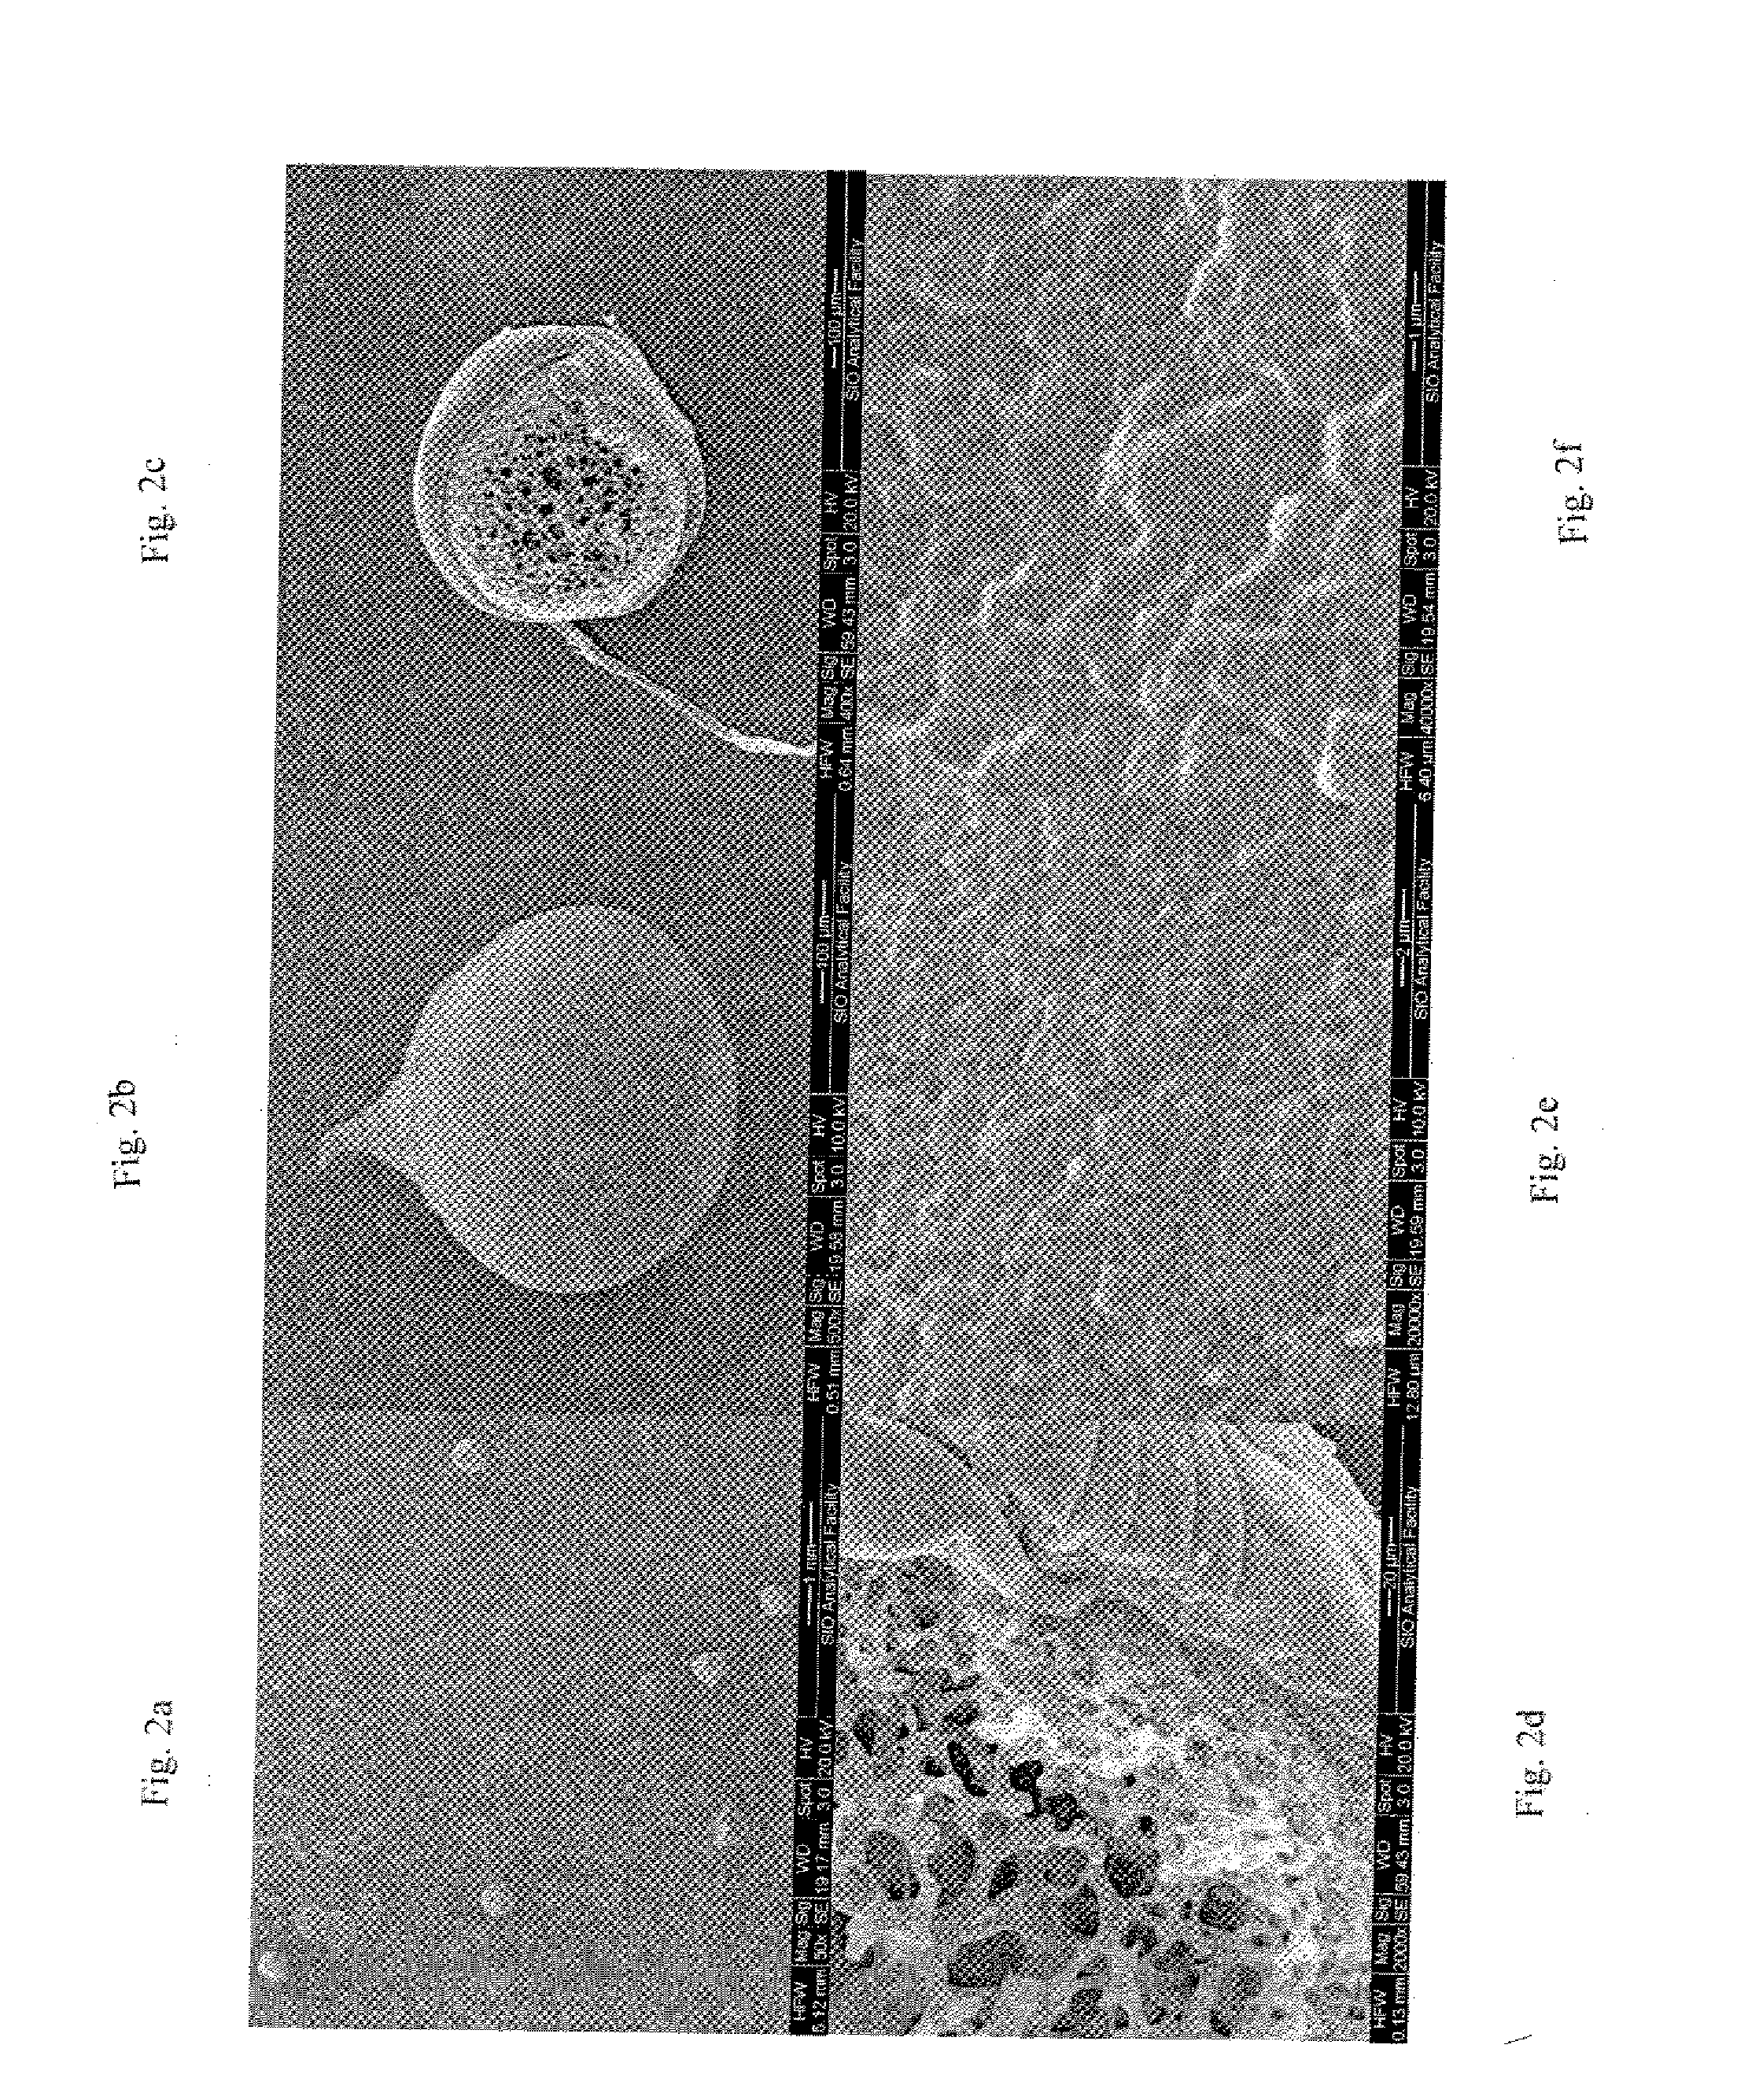 Porous intravascular embolization particles and related methods